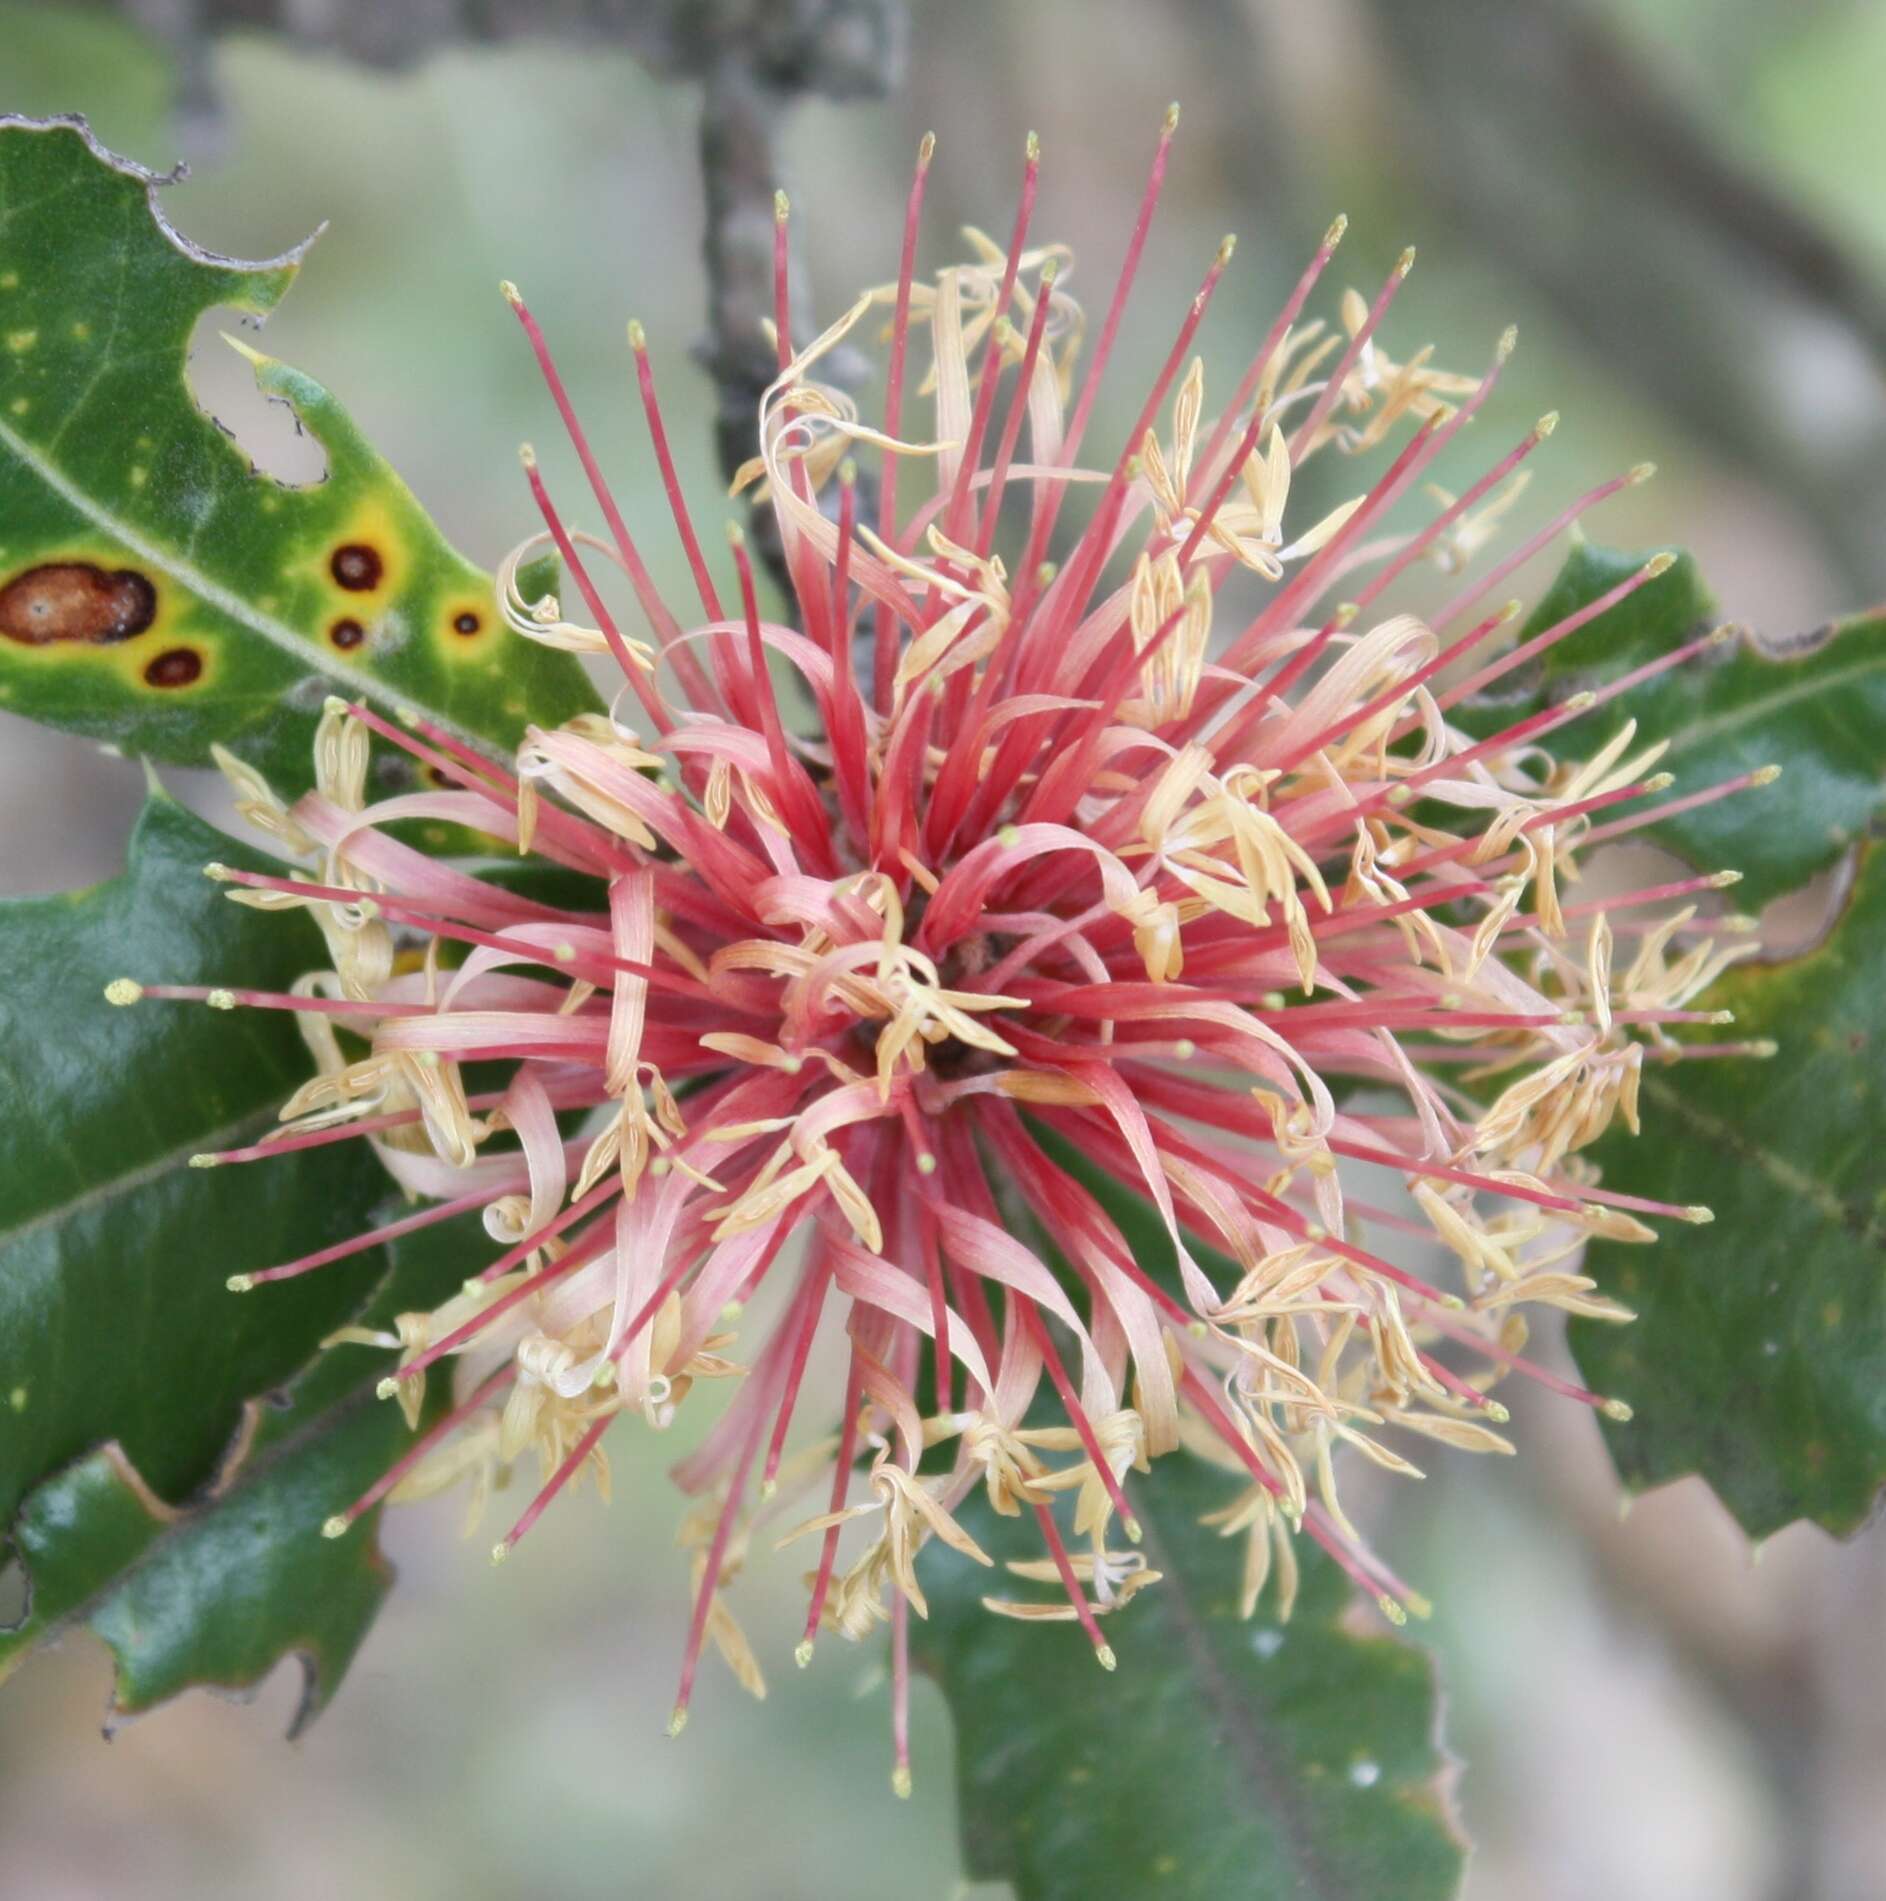 Image of holly-leaved banksia